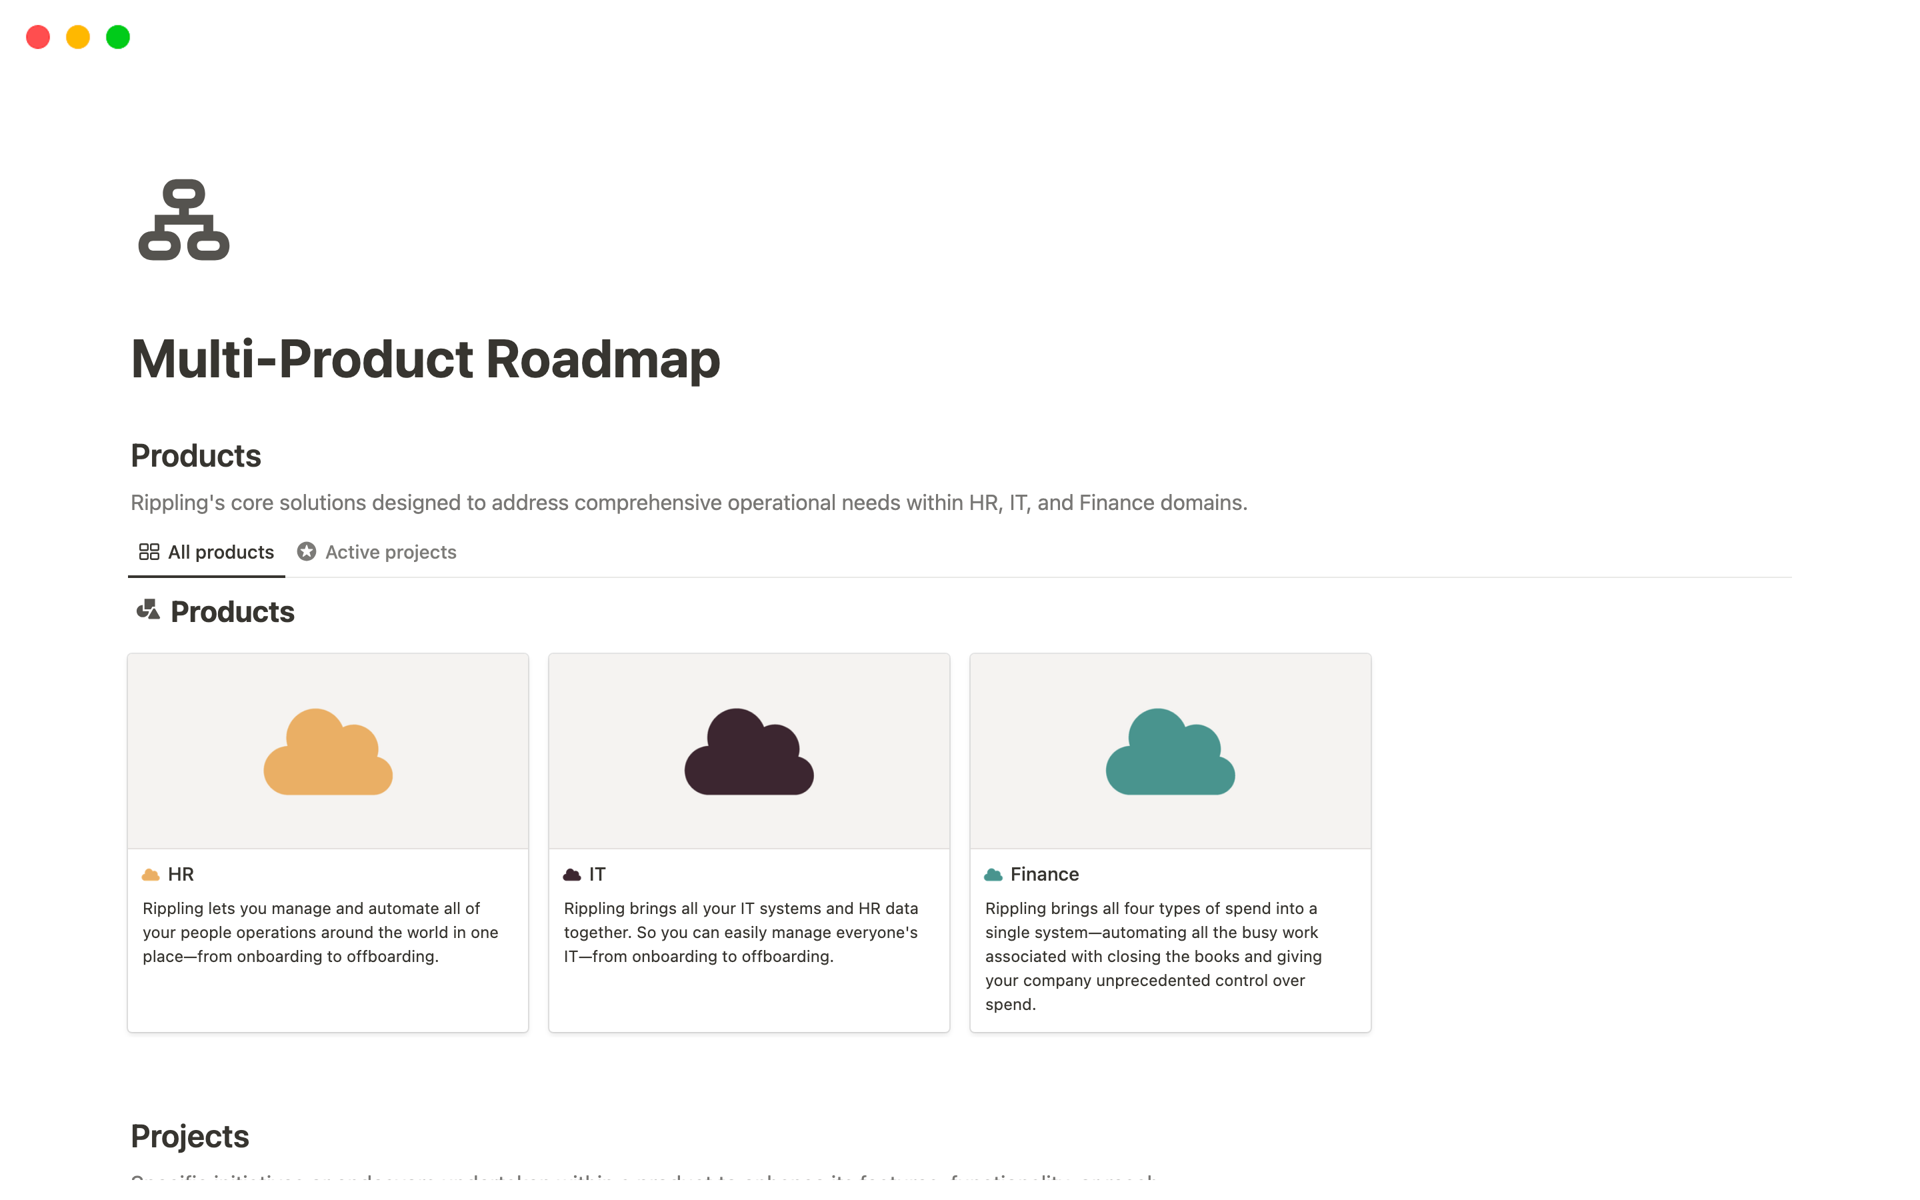 Rippling’s Multi-Product Roadmap provides a structured approach to navigate products, their associated projects, and underlying tasks.